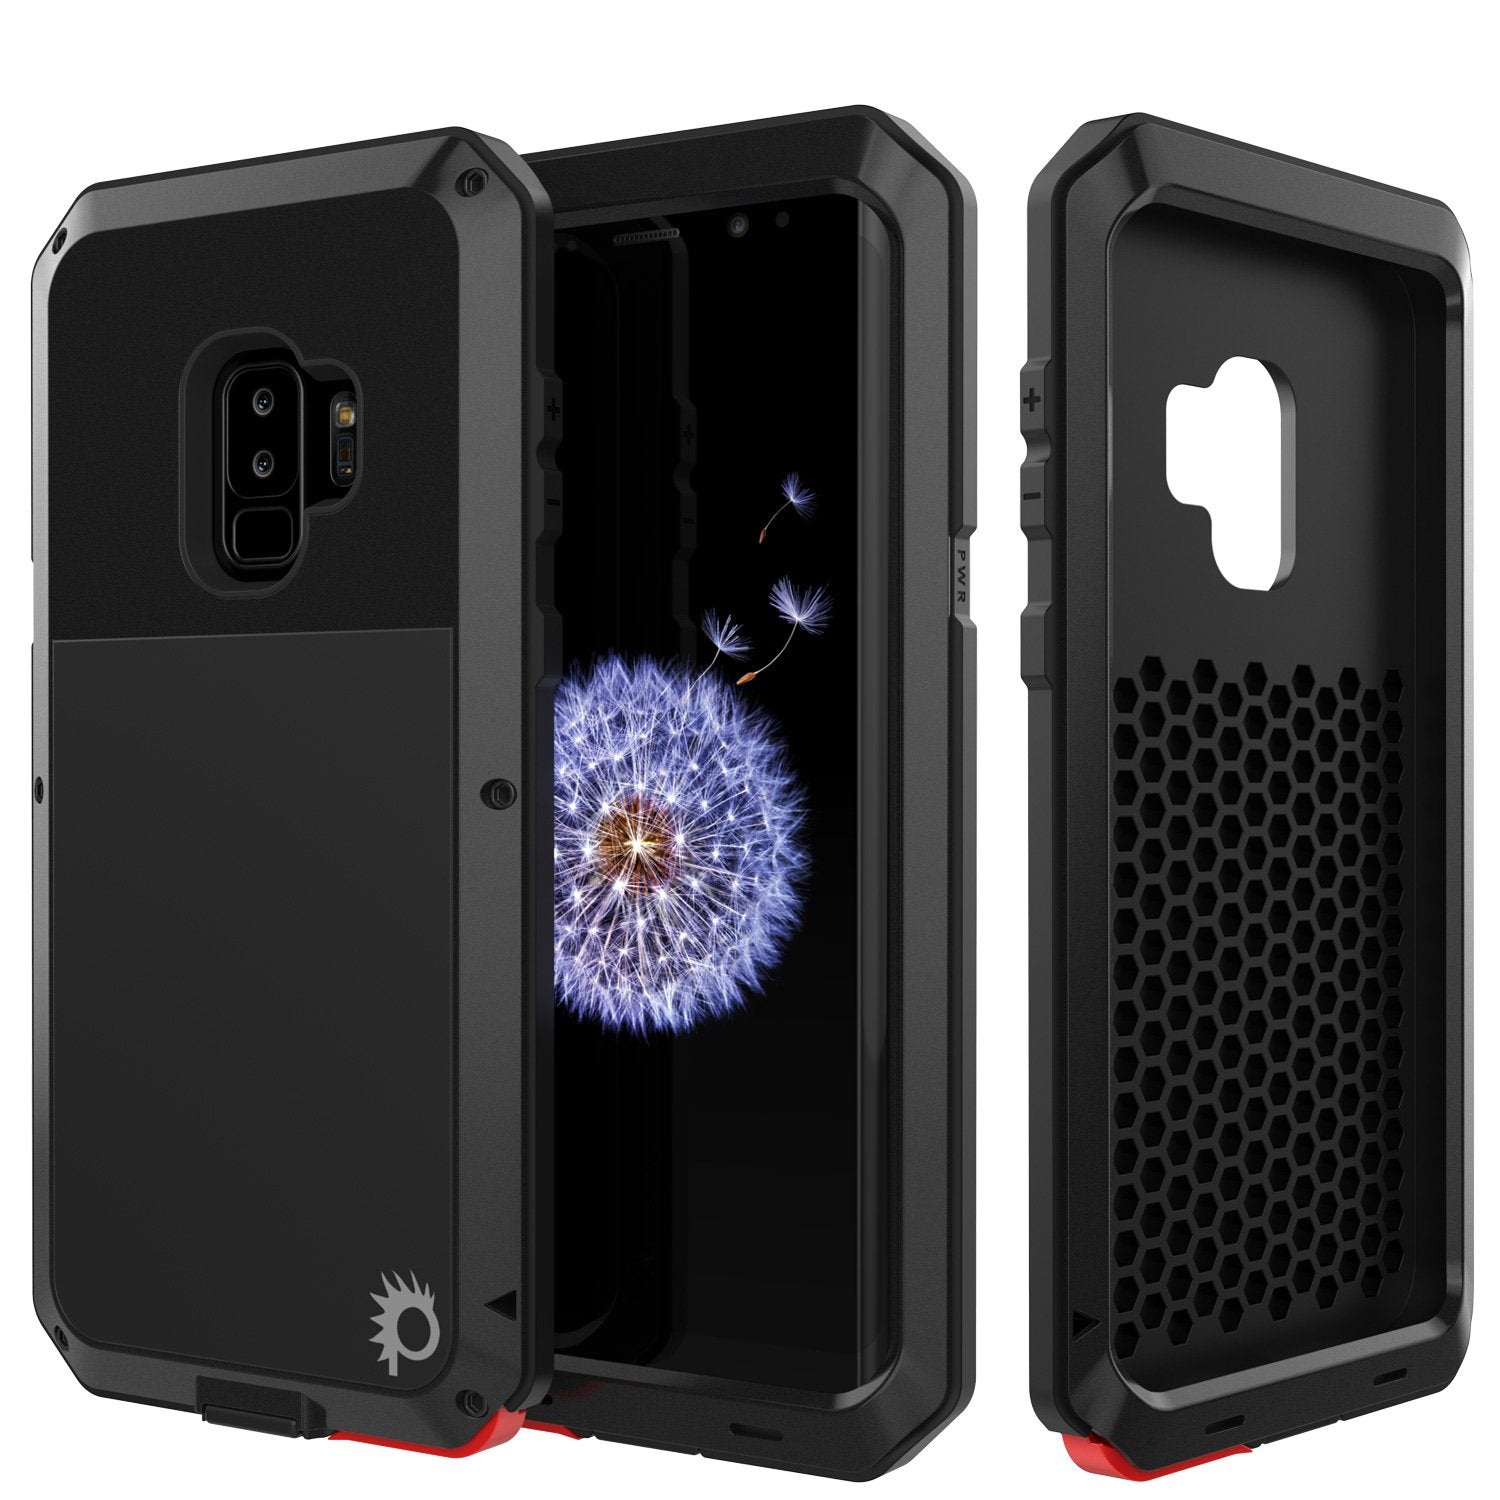 Galaxy S9 Plus Metal Case, Heavy Duty Military Grade Rugged Armor Cover [shock proof] Hybrid Full Body Hard Aluminum & TPU Design [non slip] W/ Prime Drop Protection for Samsung Galaxy S9 Plus [Black] - PunkCase NZ